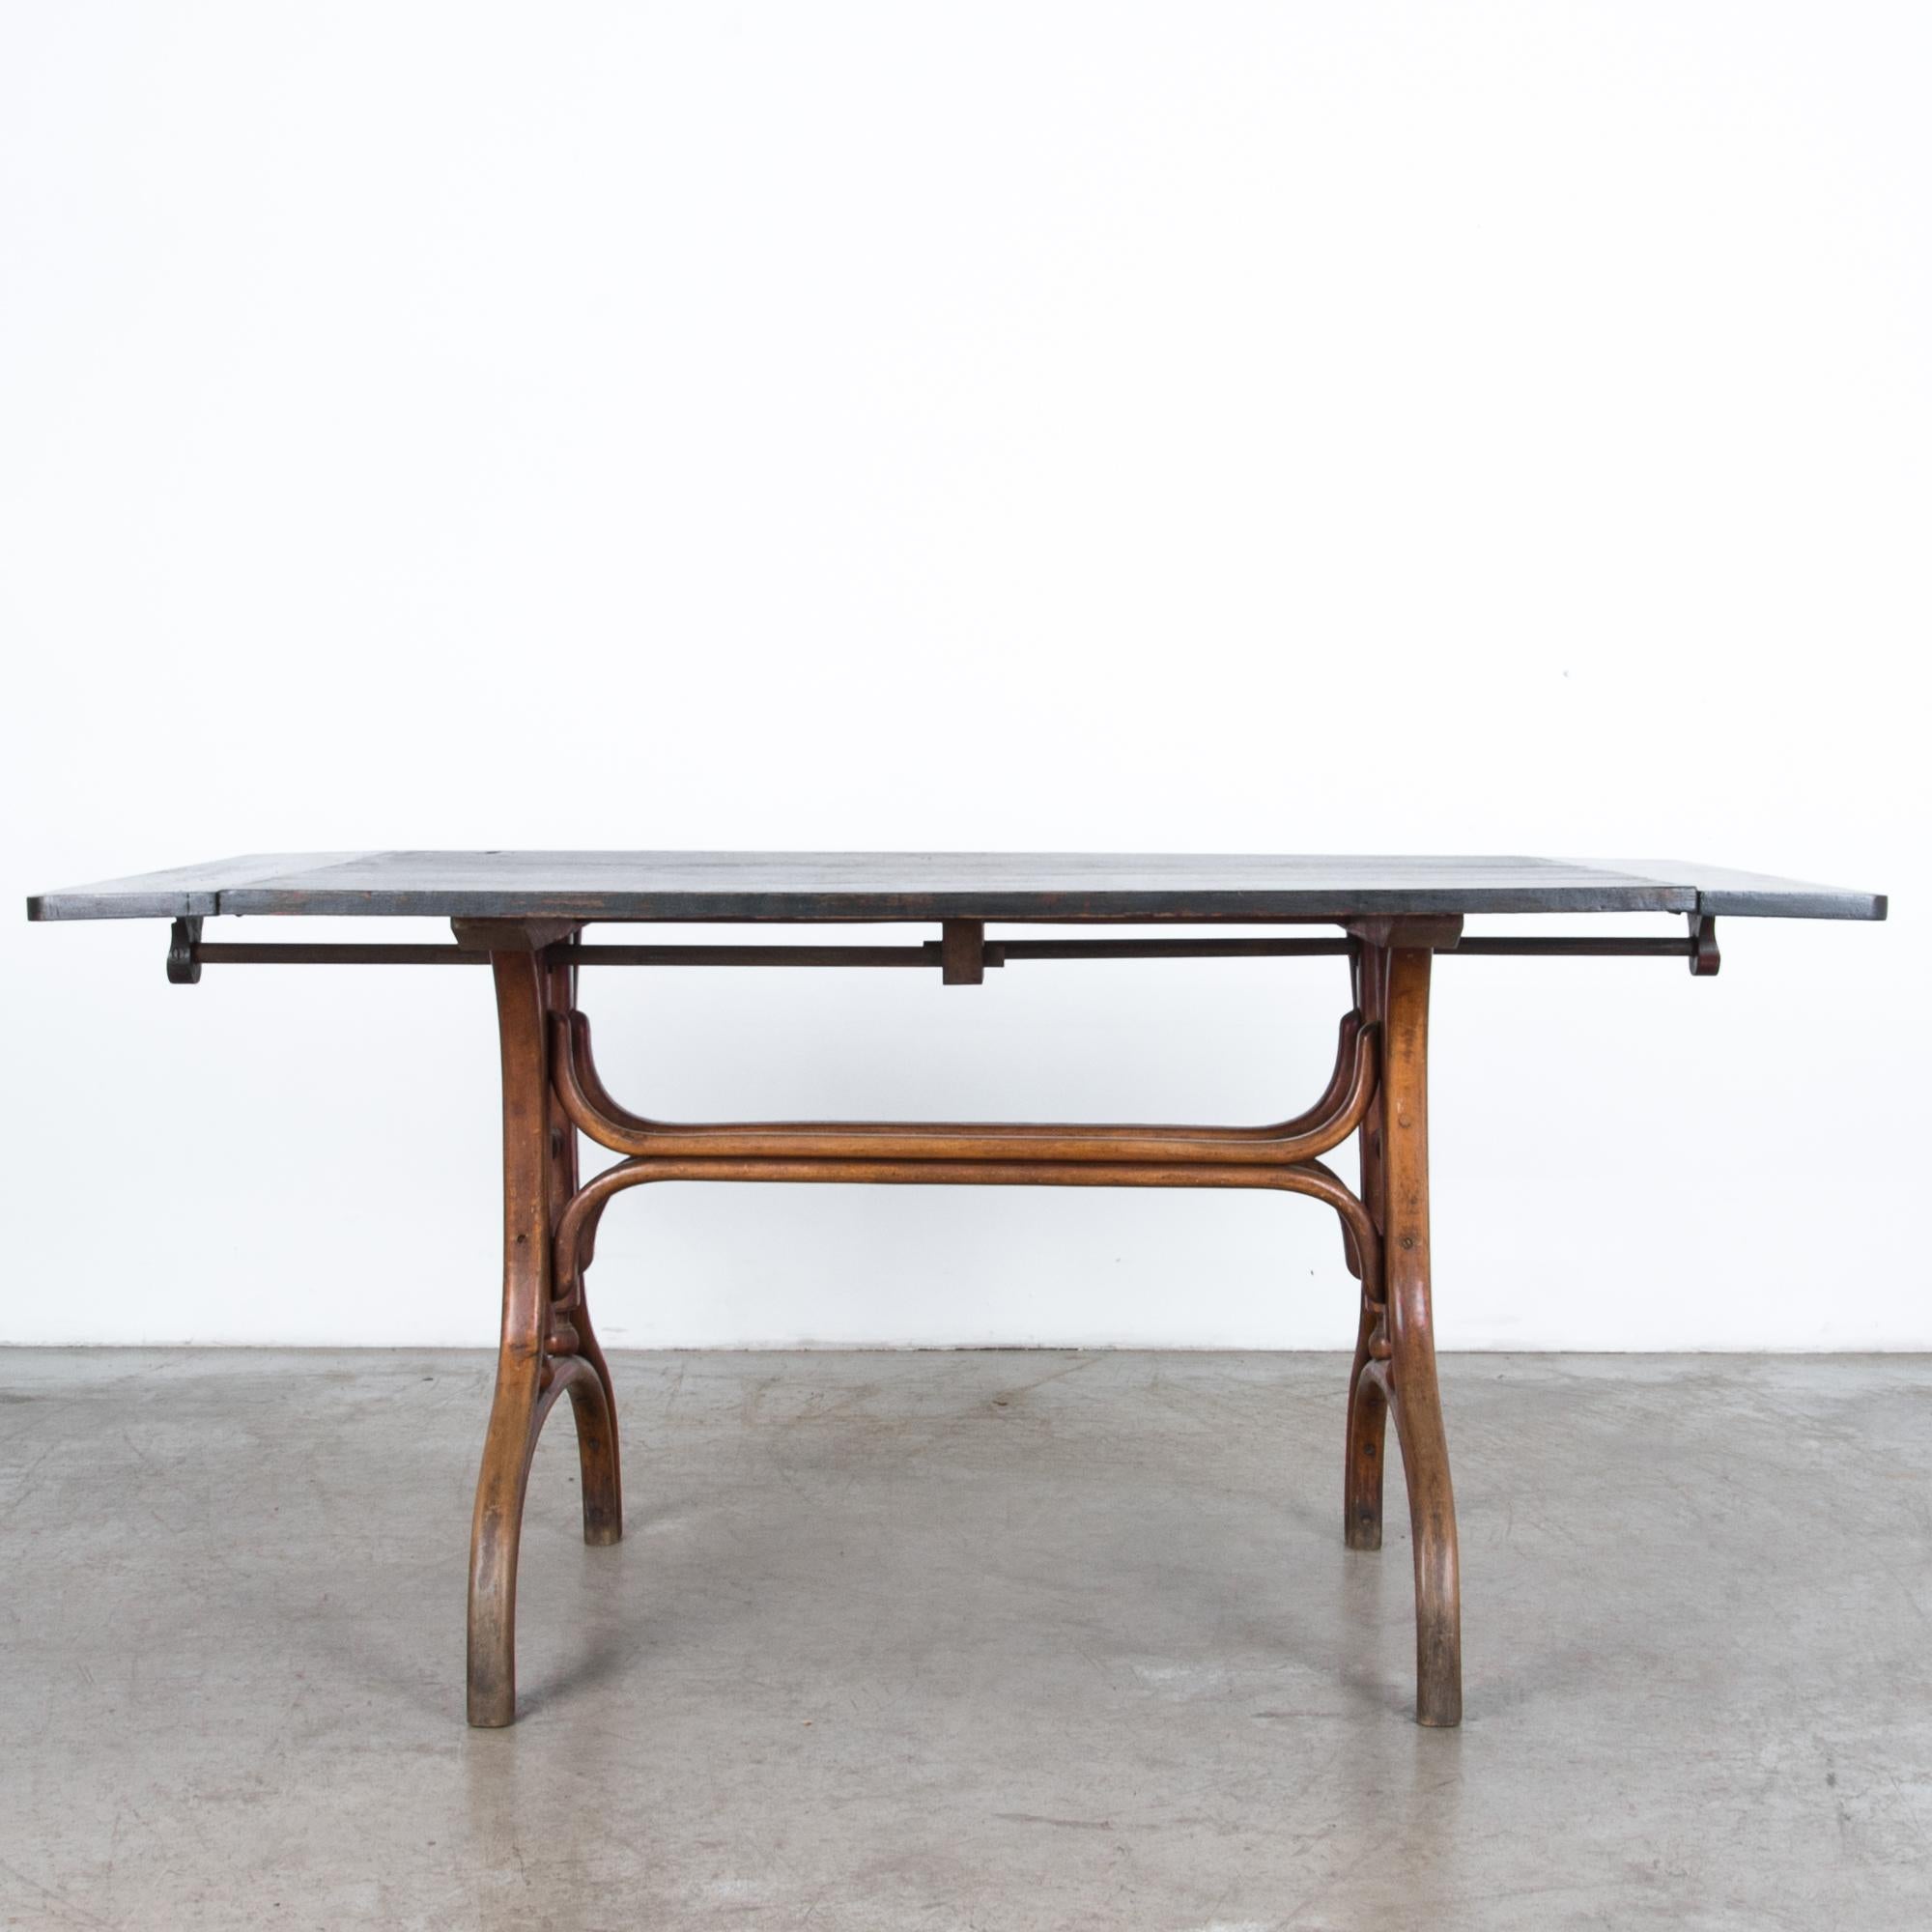 Derived from Thonet style bentwood furniture, this table originates from early 20th century, Austria. The first fashion in mass production, simple and elegant forms were created with the use of innovative modern technologies. A black painted top